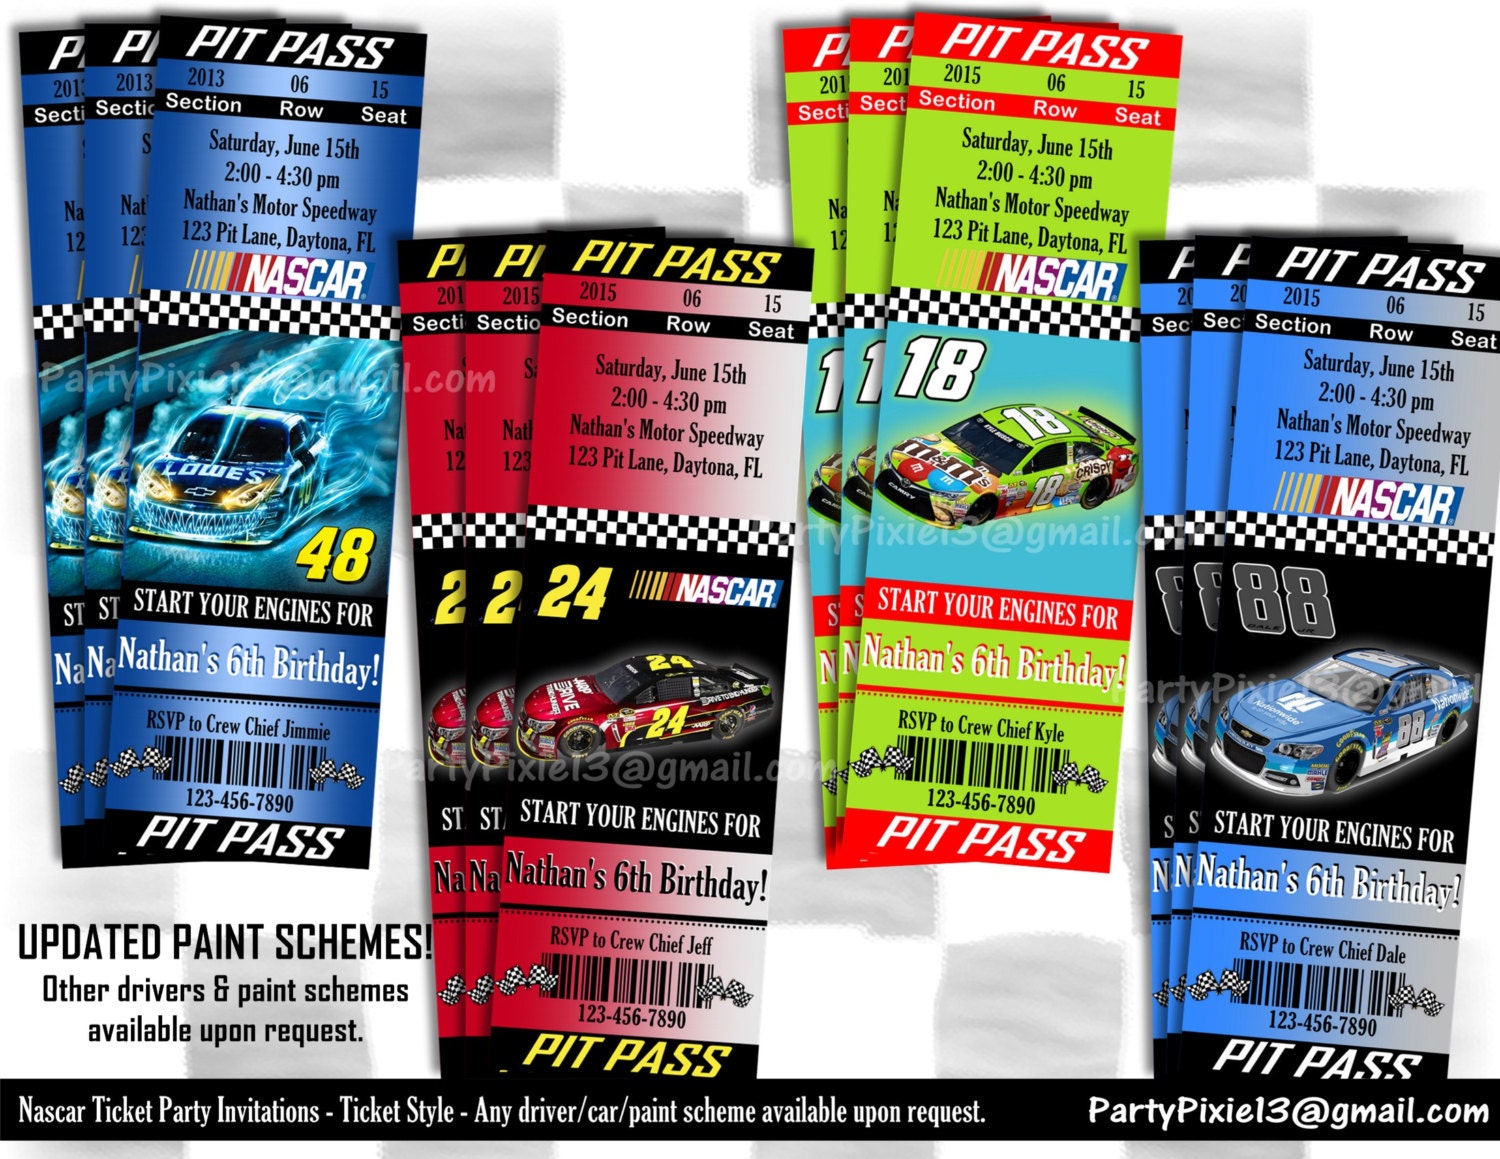 Nascar Ticket Party Invitation Ticket Style Pit Pass1500 x 1159